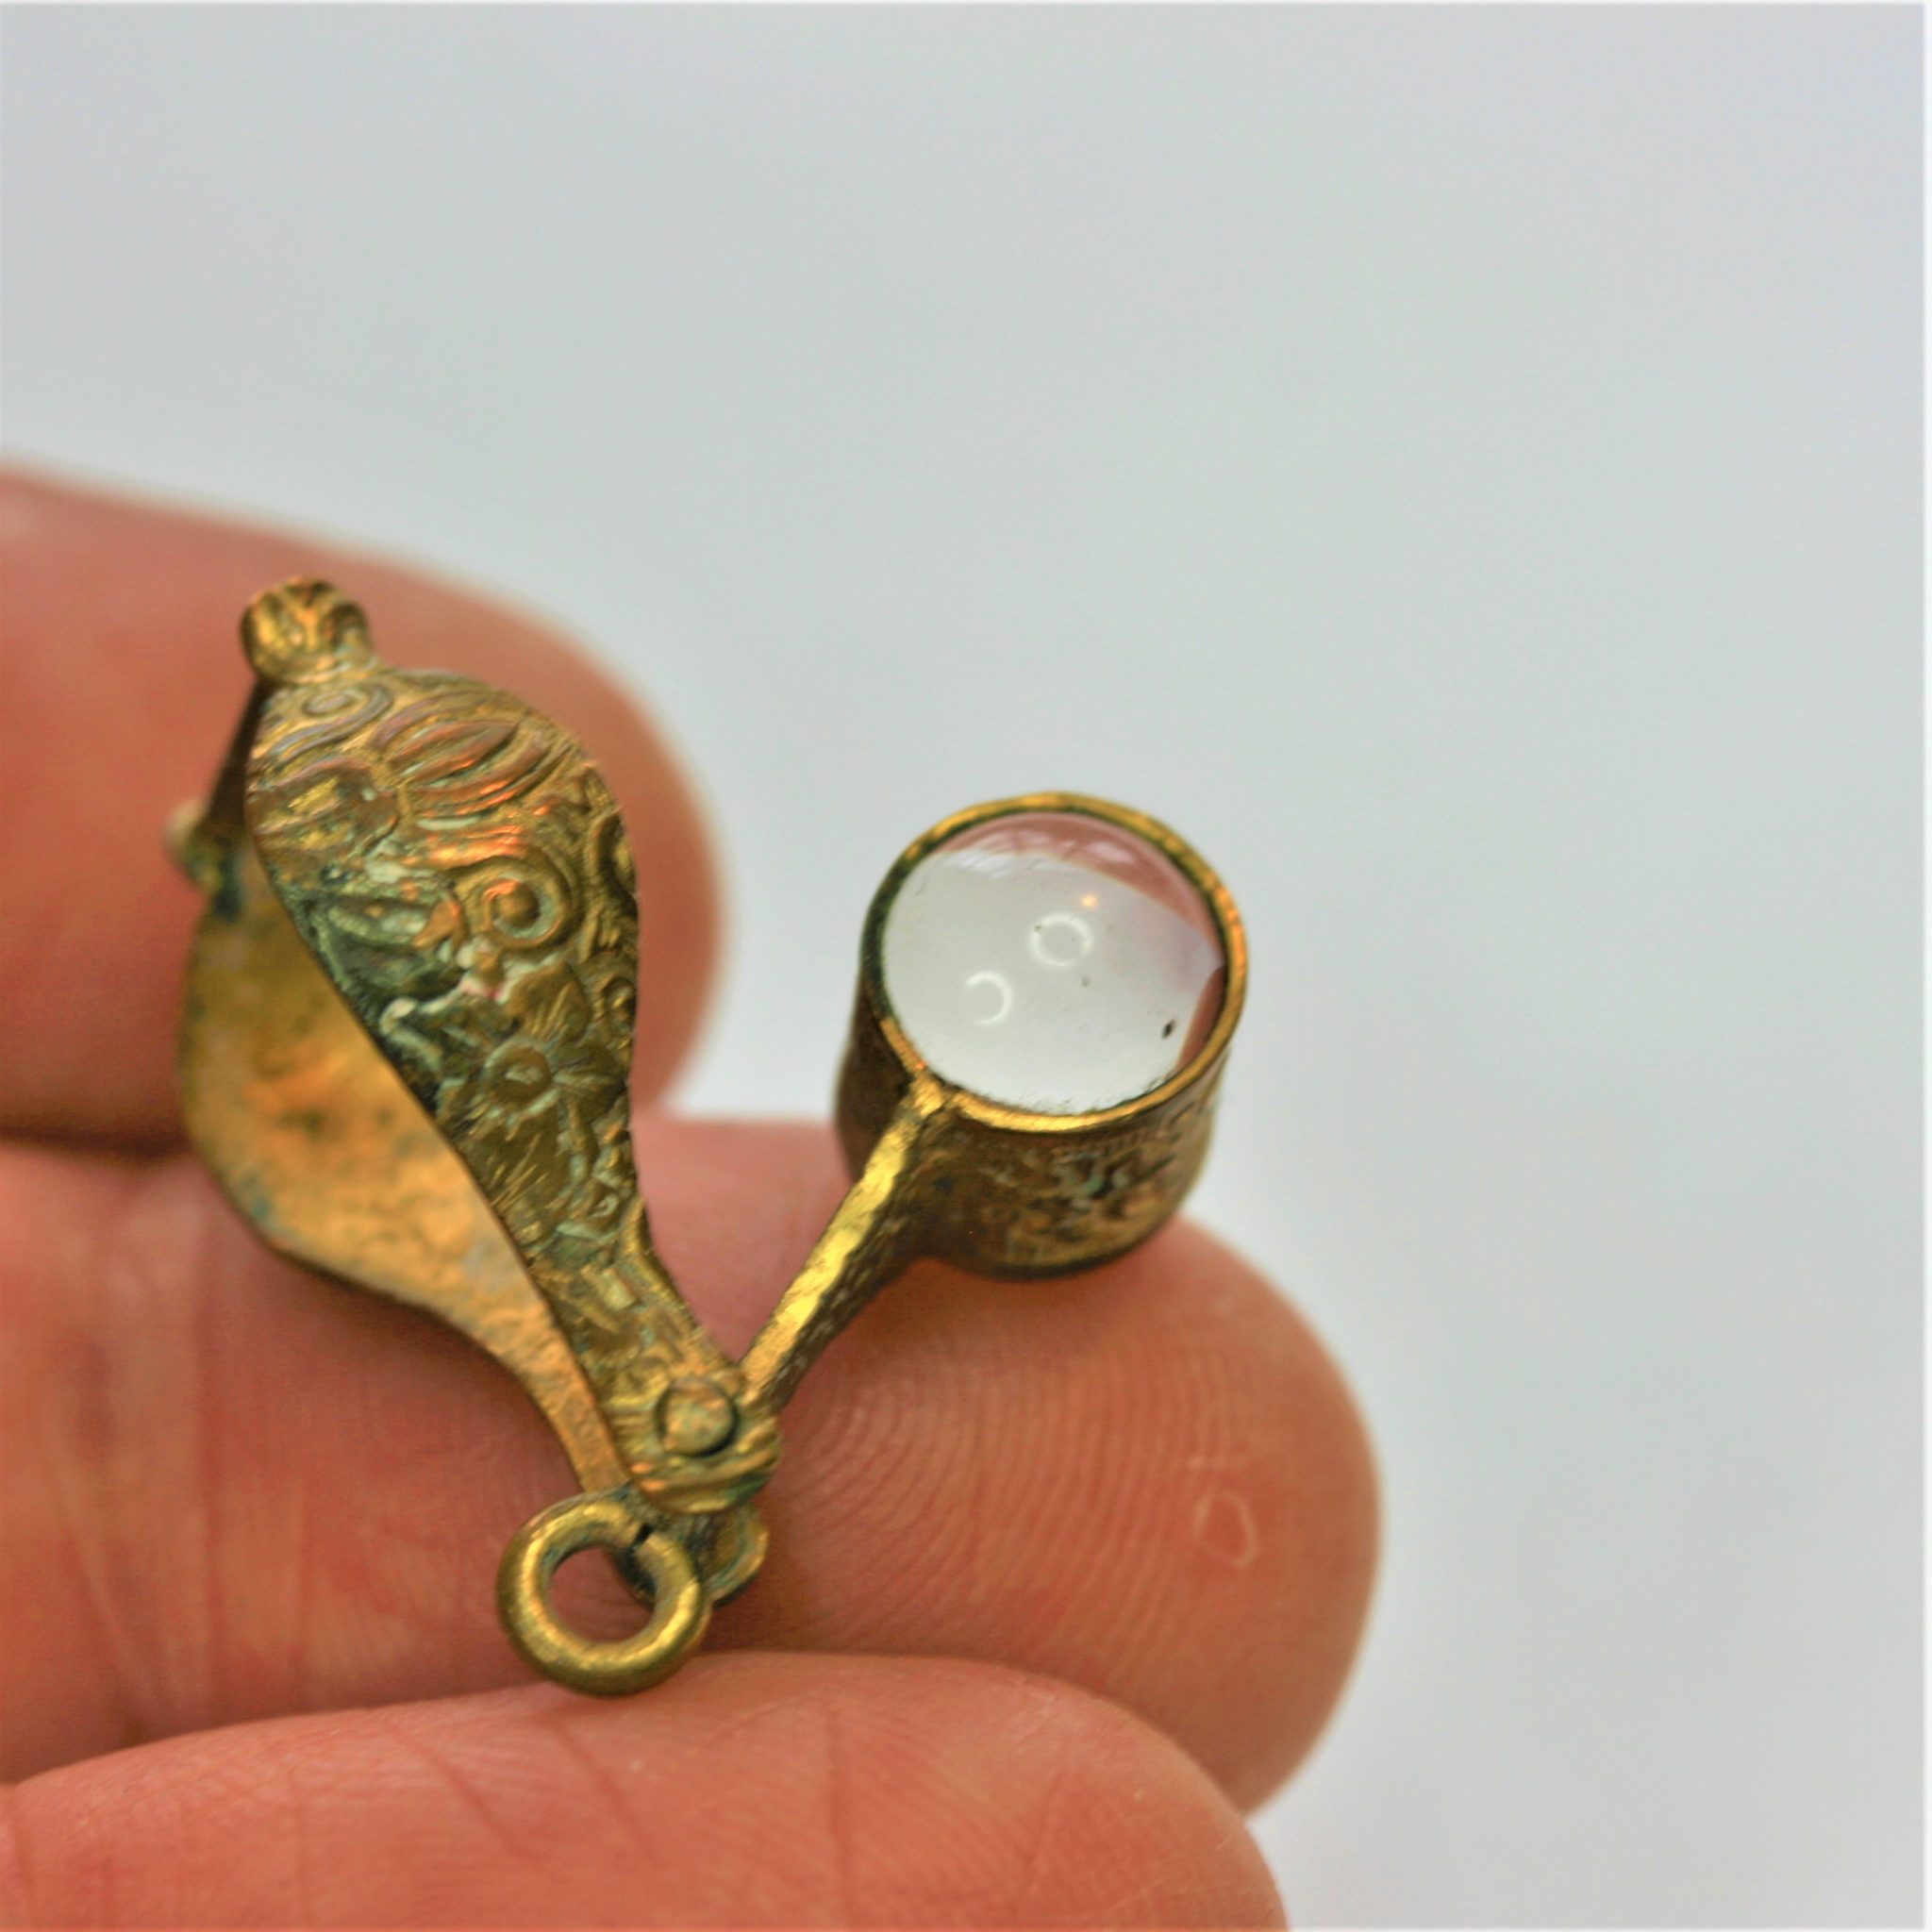 C1860 MINIATURE BRASS MICROSCOPE POCKET MAGNIFYING GLASS, 1 IN. LONG, GOOD COND. STRONG MAGNIFICATION